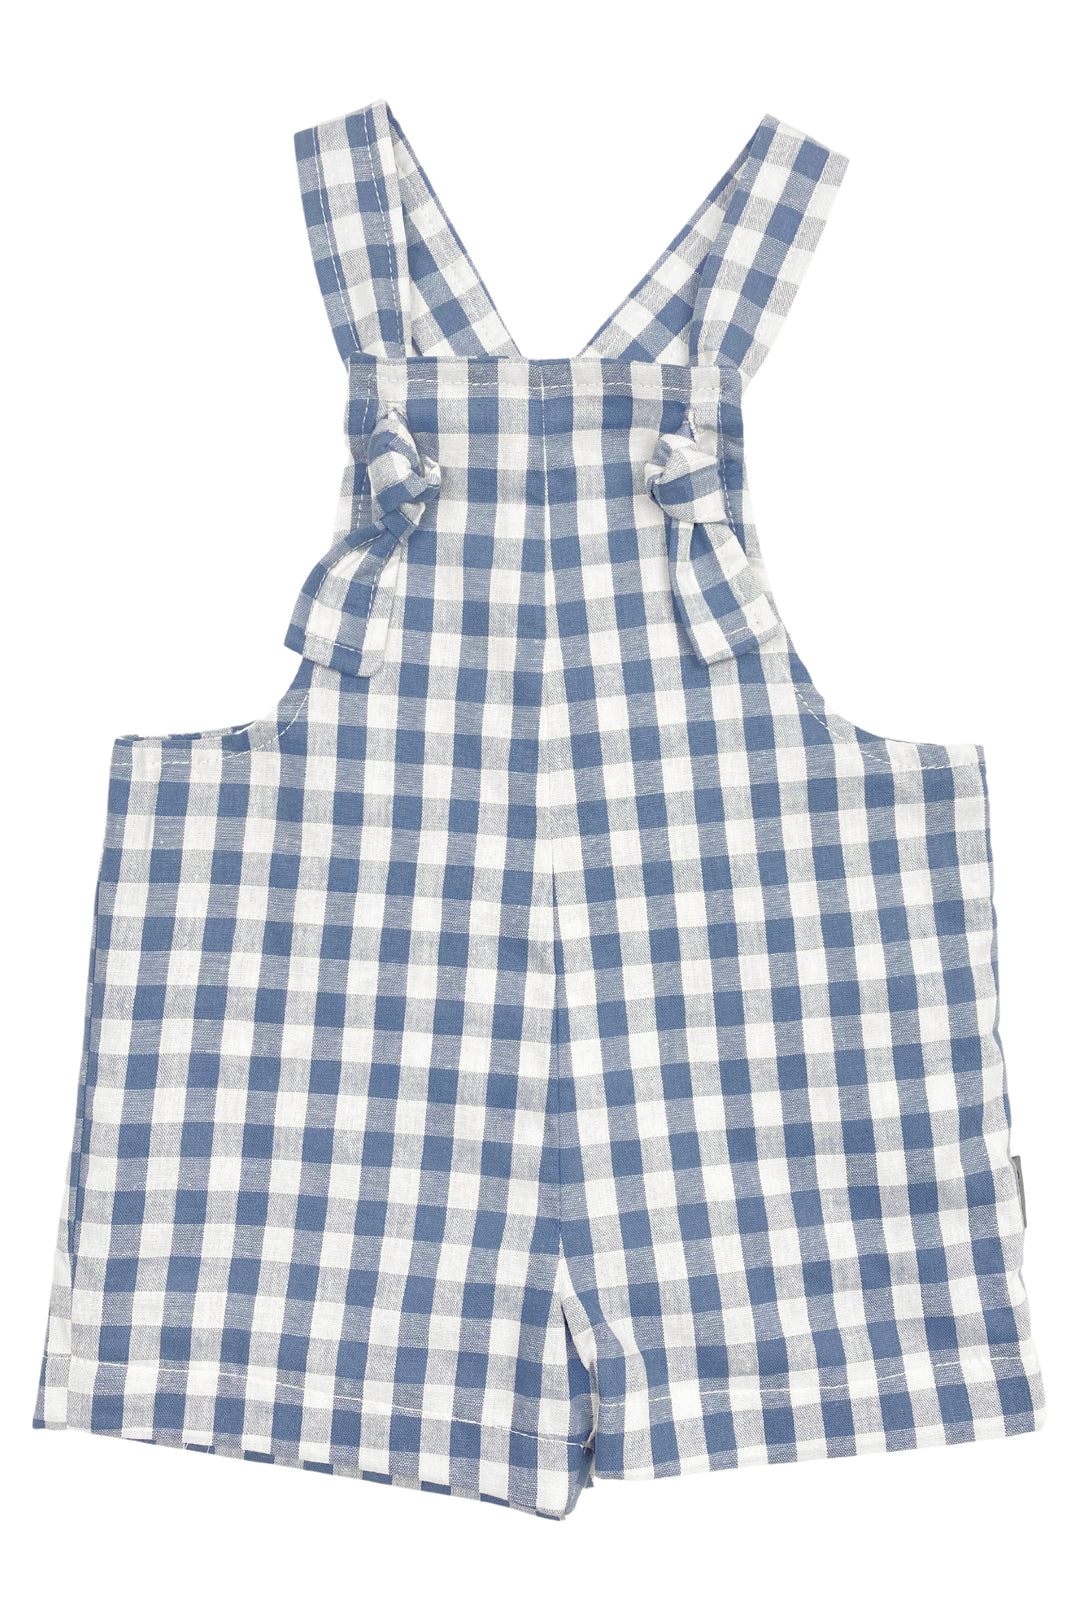 Cocote "Frank" Gingham Dungarees | Millie and John